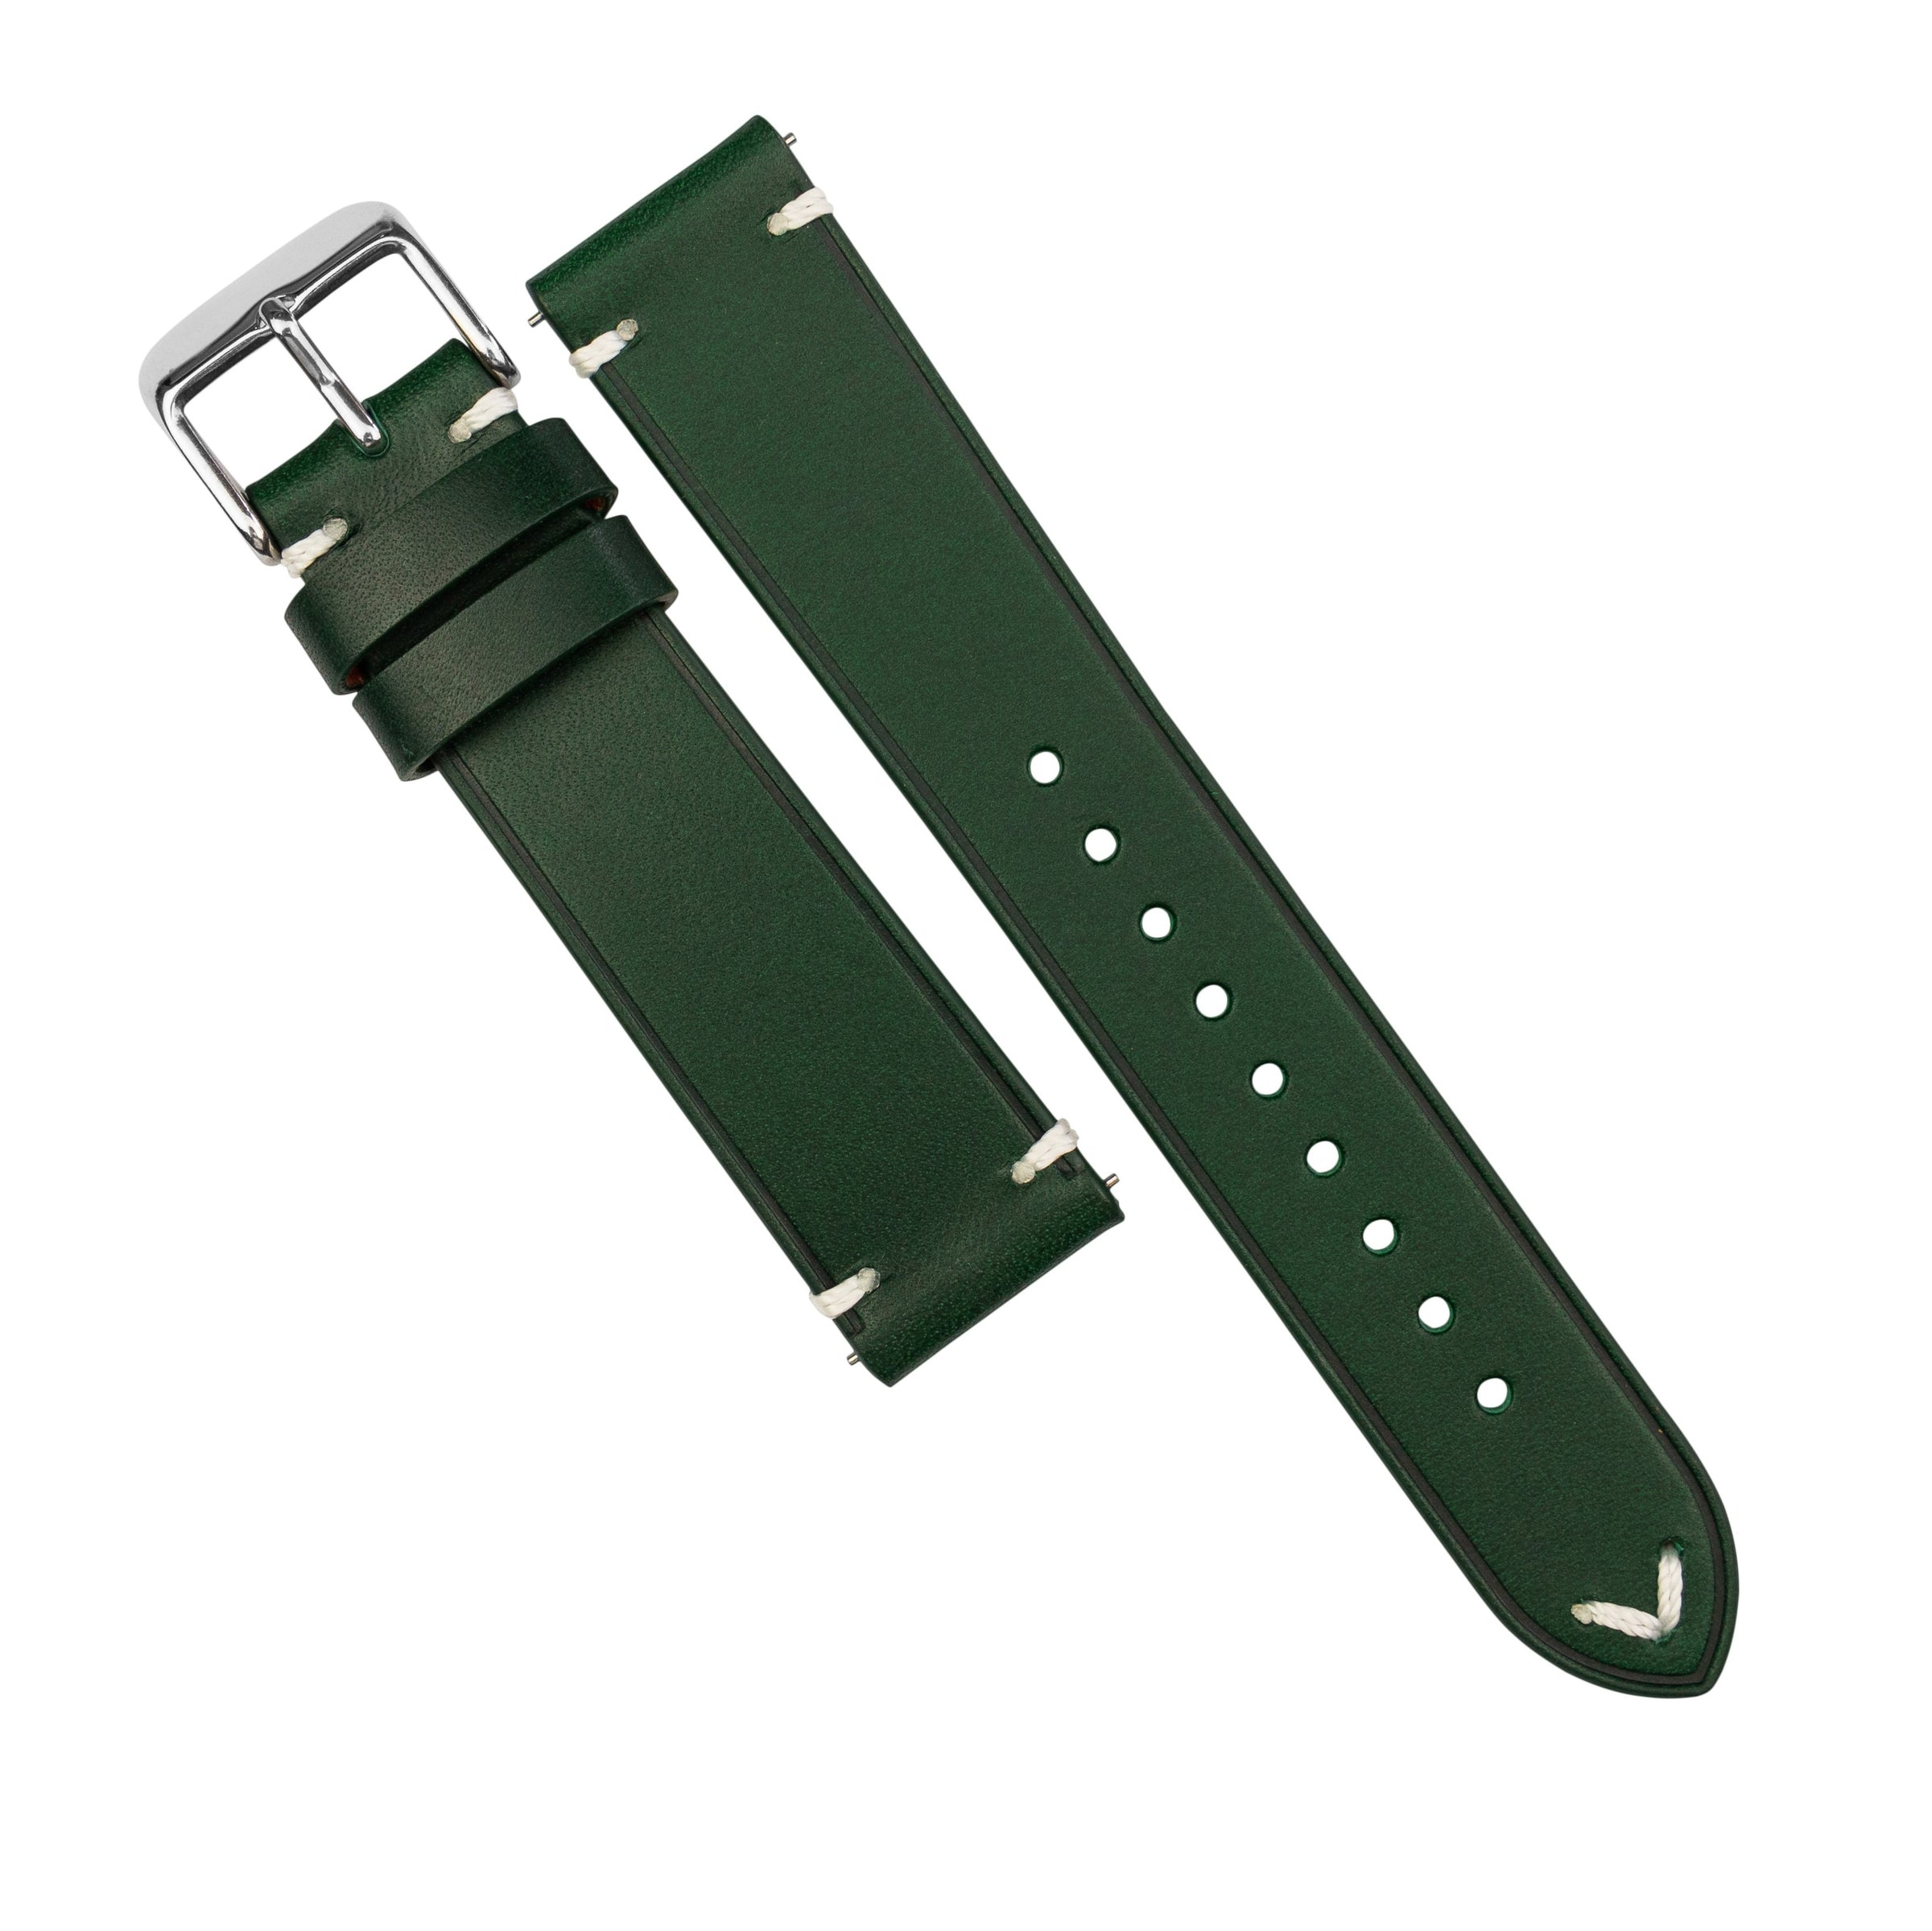 Emery Vintage Buttero Leather Strap in Green (18mm) - Nomad Watch Works SG